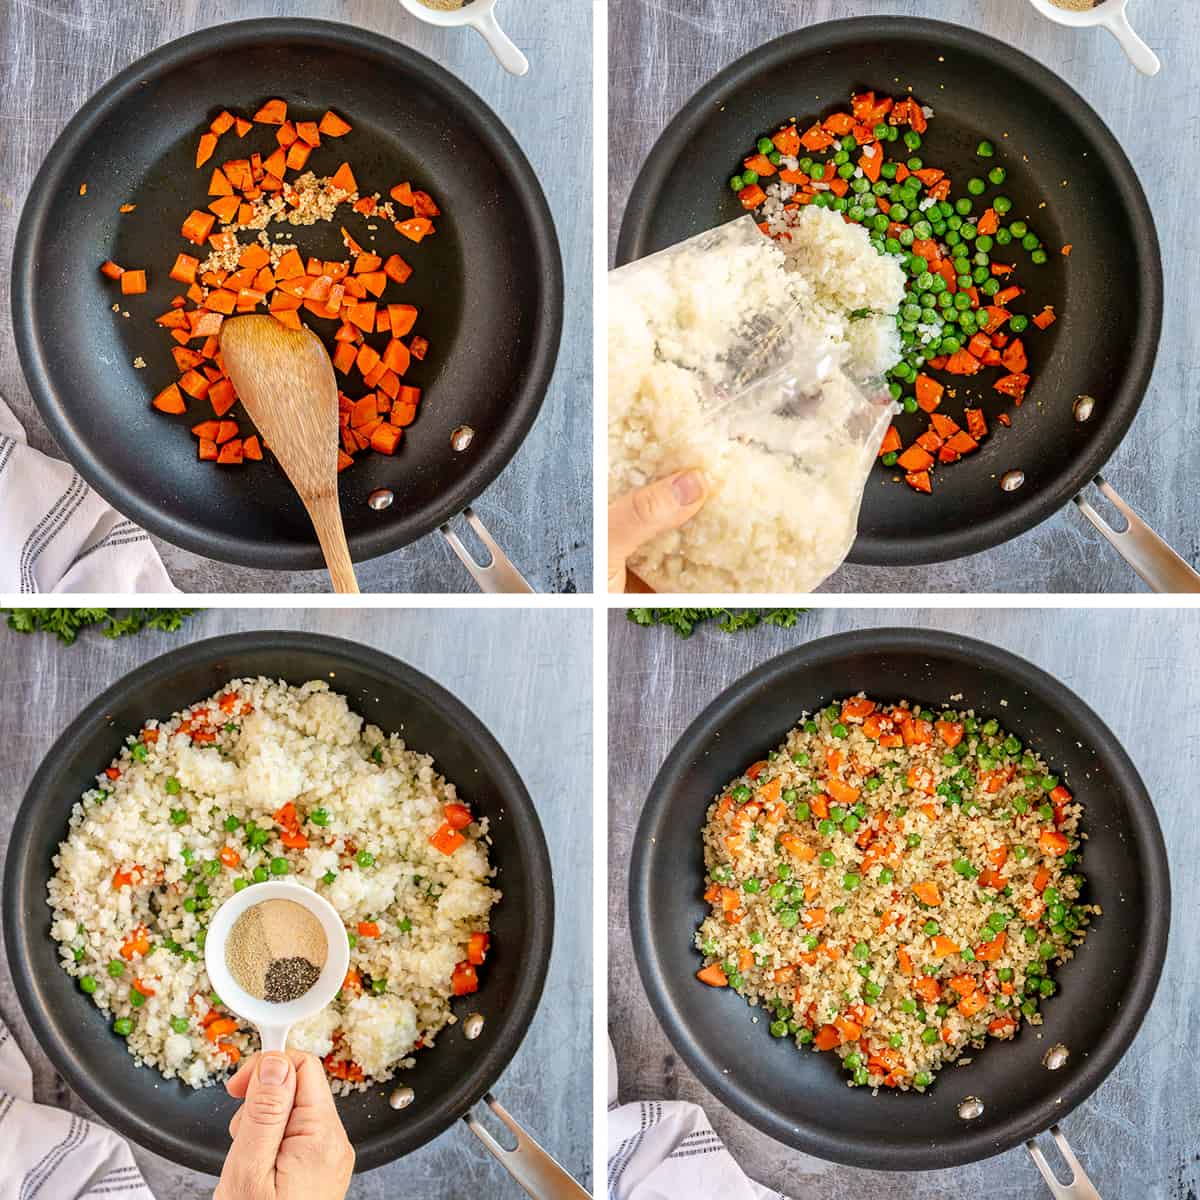 Ingredients combined in a skillet to make Cauliflower Rice Pilaf.